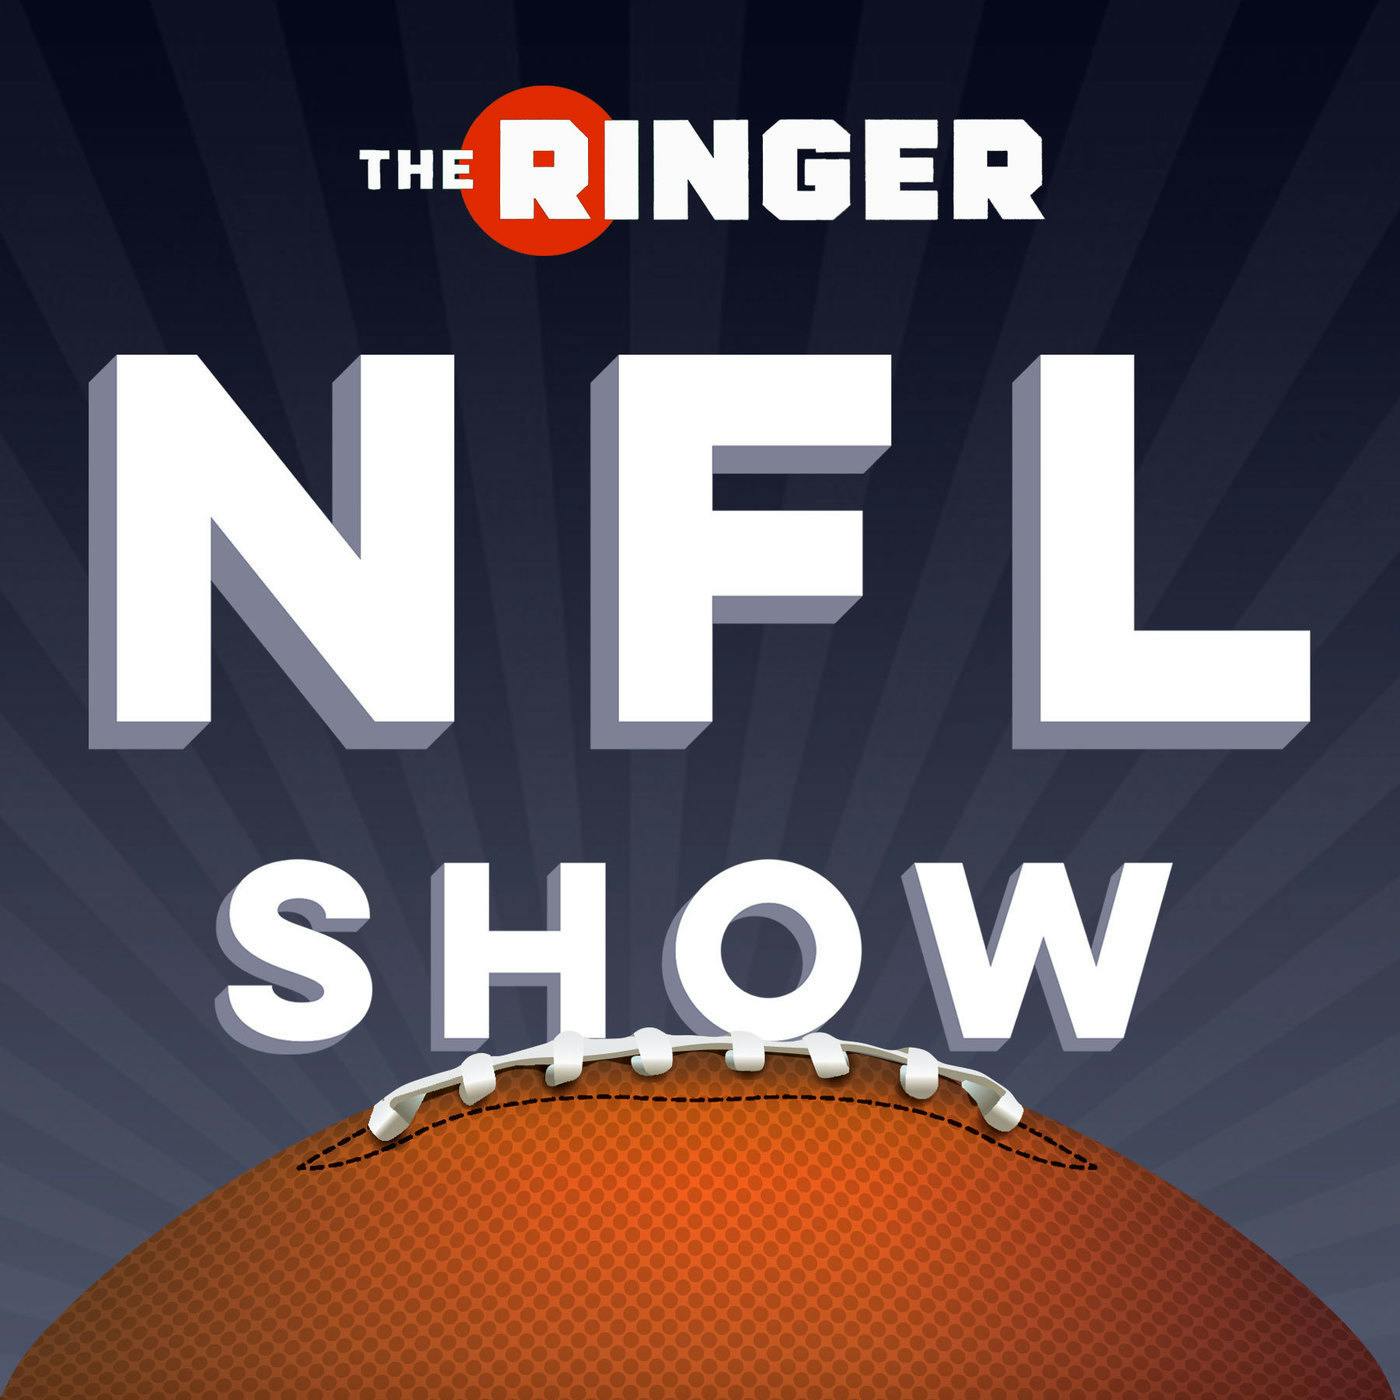 20 Prop Bets to Preview the 2020 Season | The Ringer NFL Show